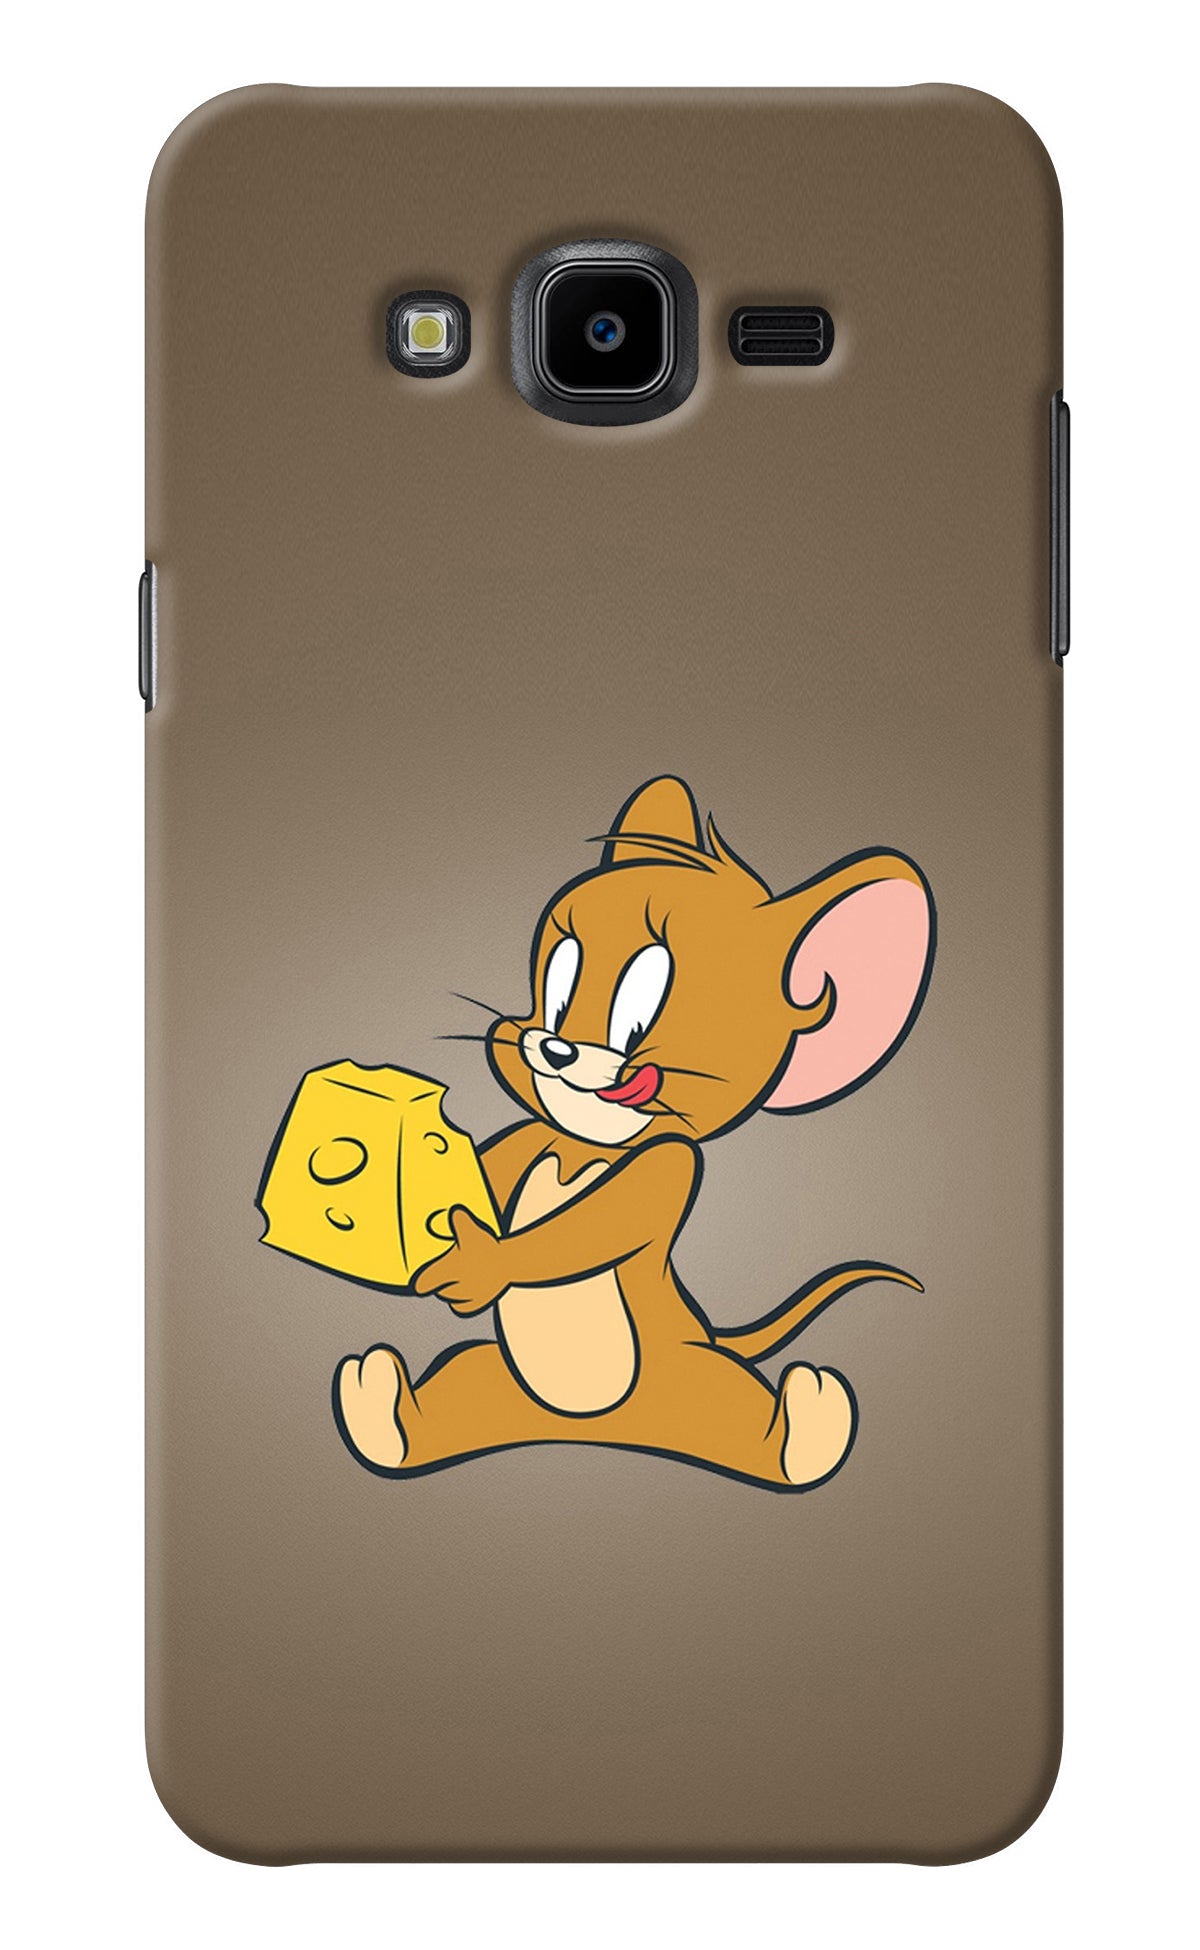 Jerry Samsung J7 Nxt Back Cover